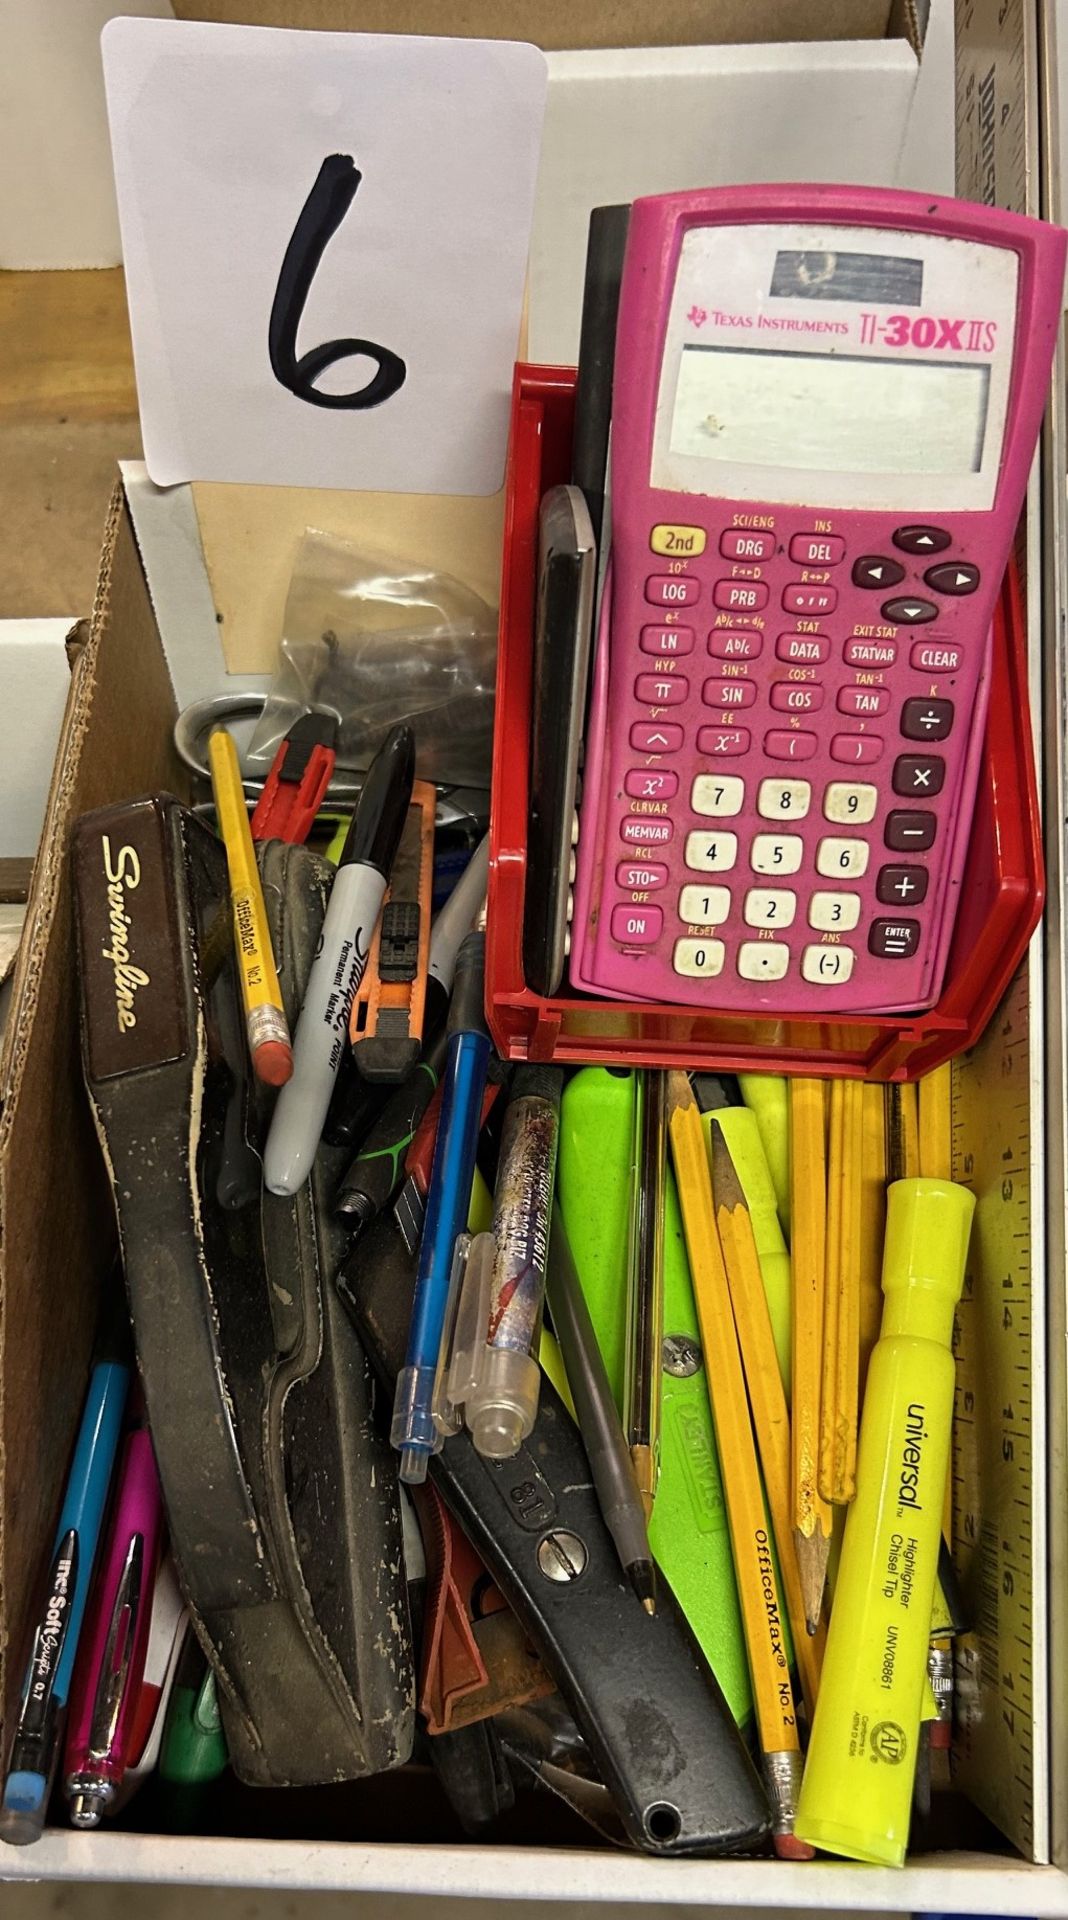 Lot of Pens, Pencils, Calculator, Highlighters, Stapler and other office items